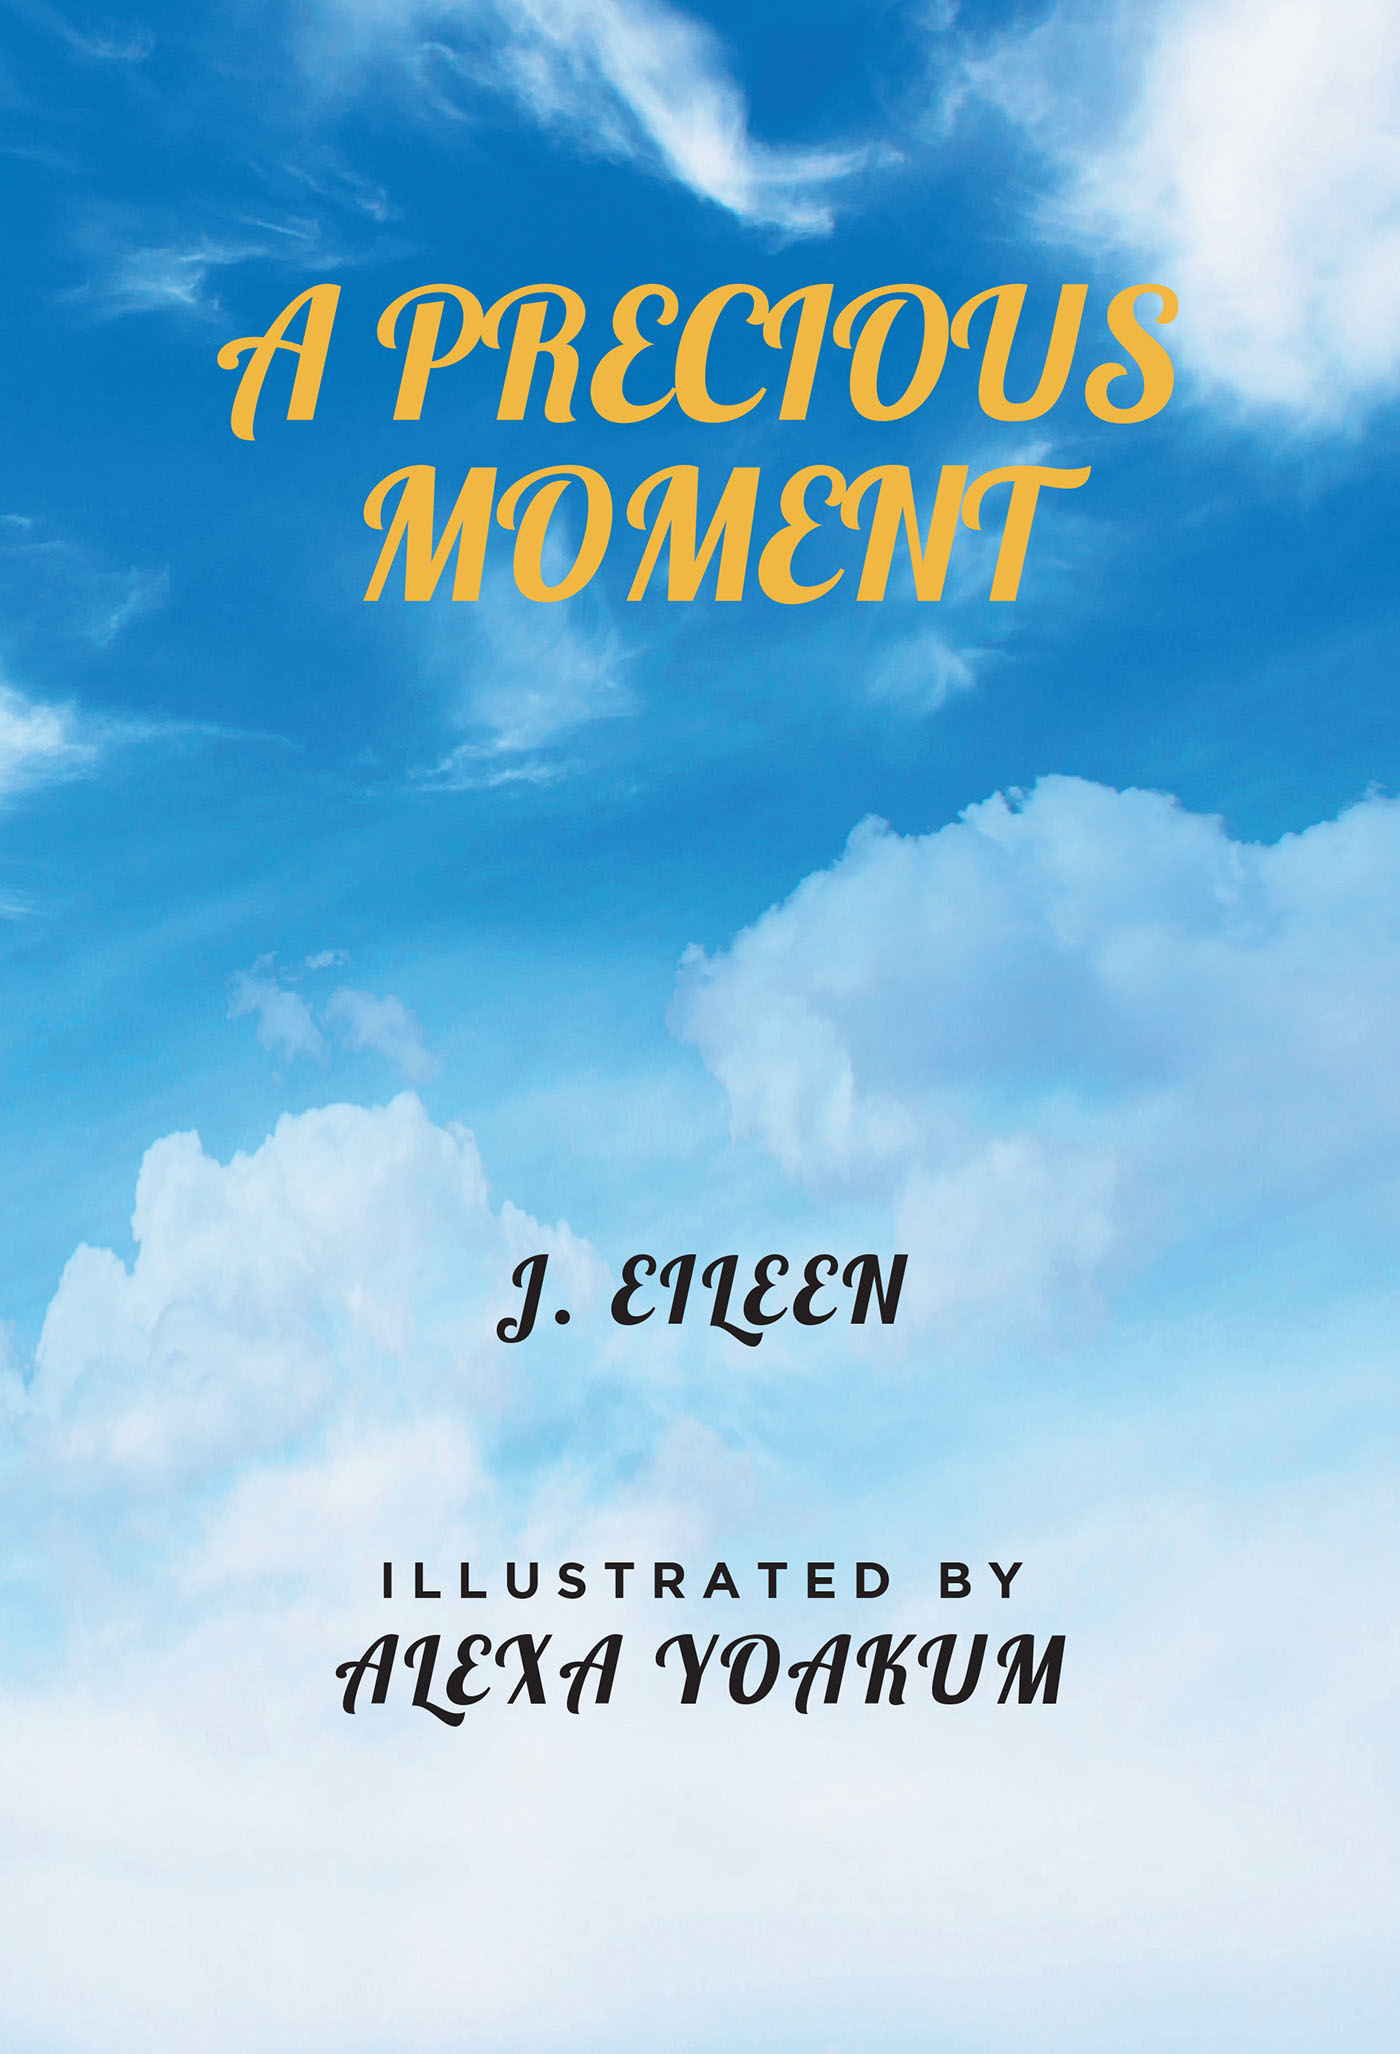 J. Eileen’s New Book, "A Precious Moment," is an Intriguing Tale That Follows a Young Couple & Their Animals as They Experience a Series of Mysteries in Their Small Town